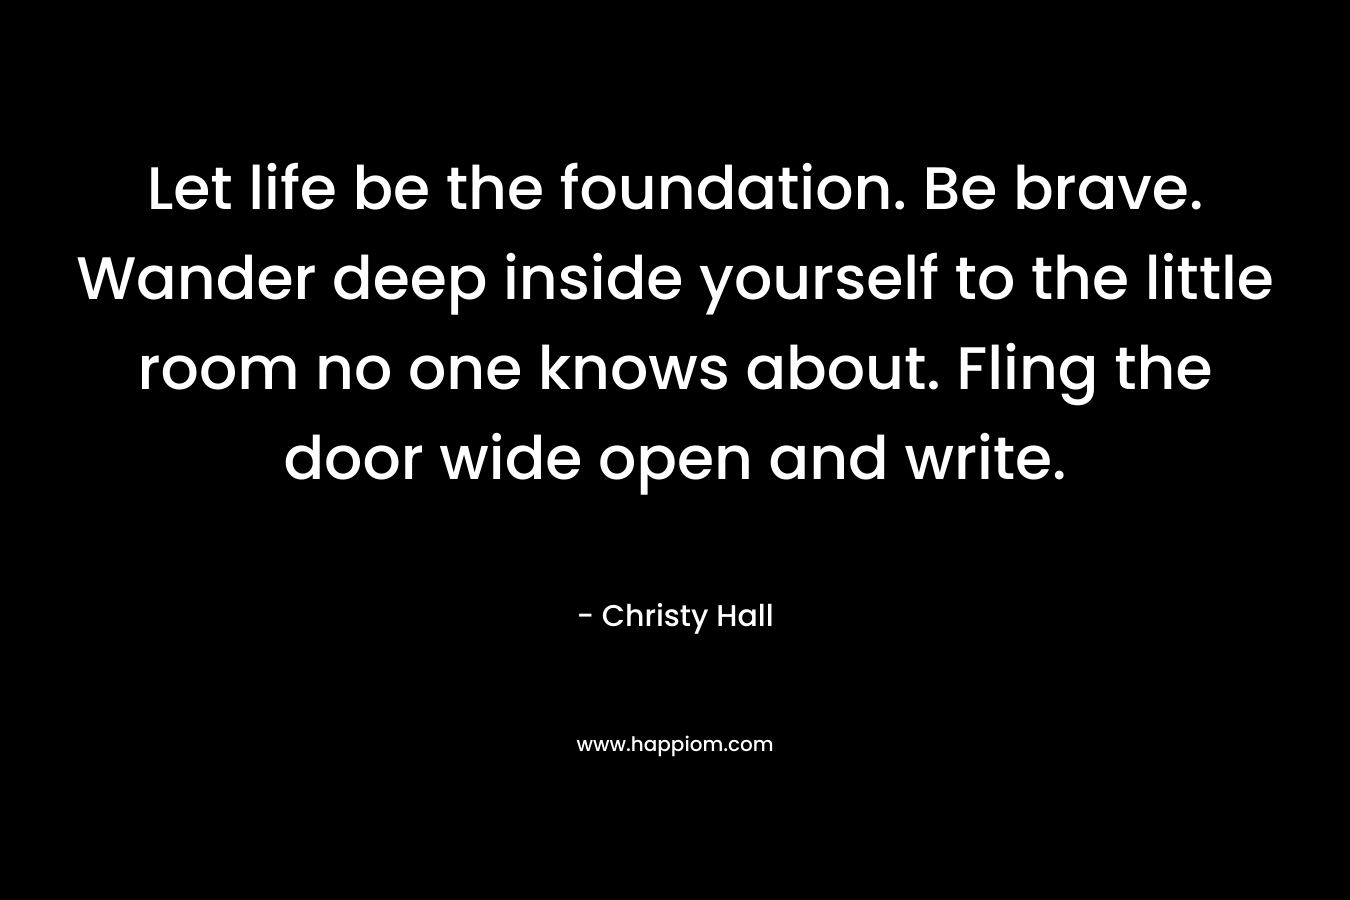 Let life be the foundation. Be brave. Wander deep inside yourself to the little room no one knows about. Fling the door wide open and write.